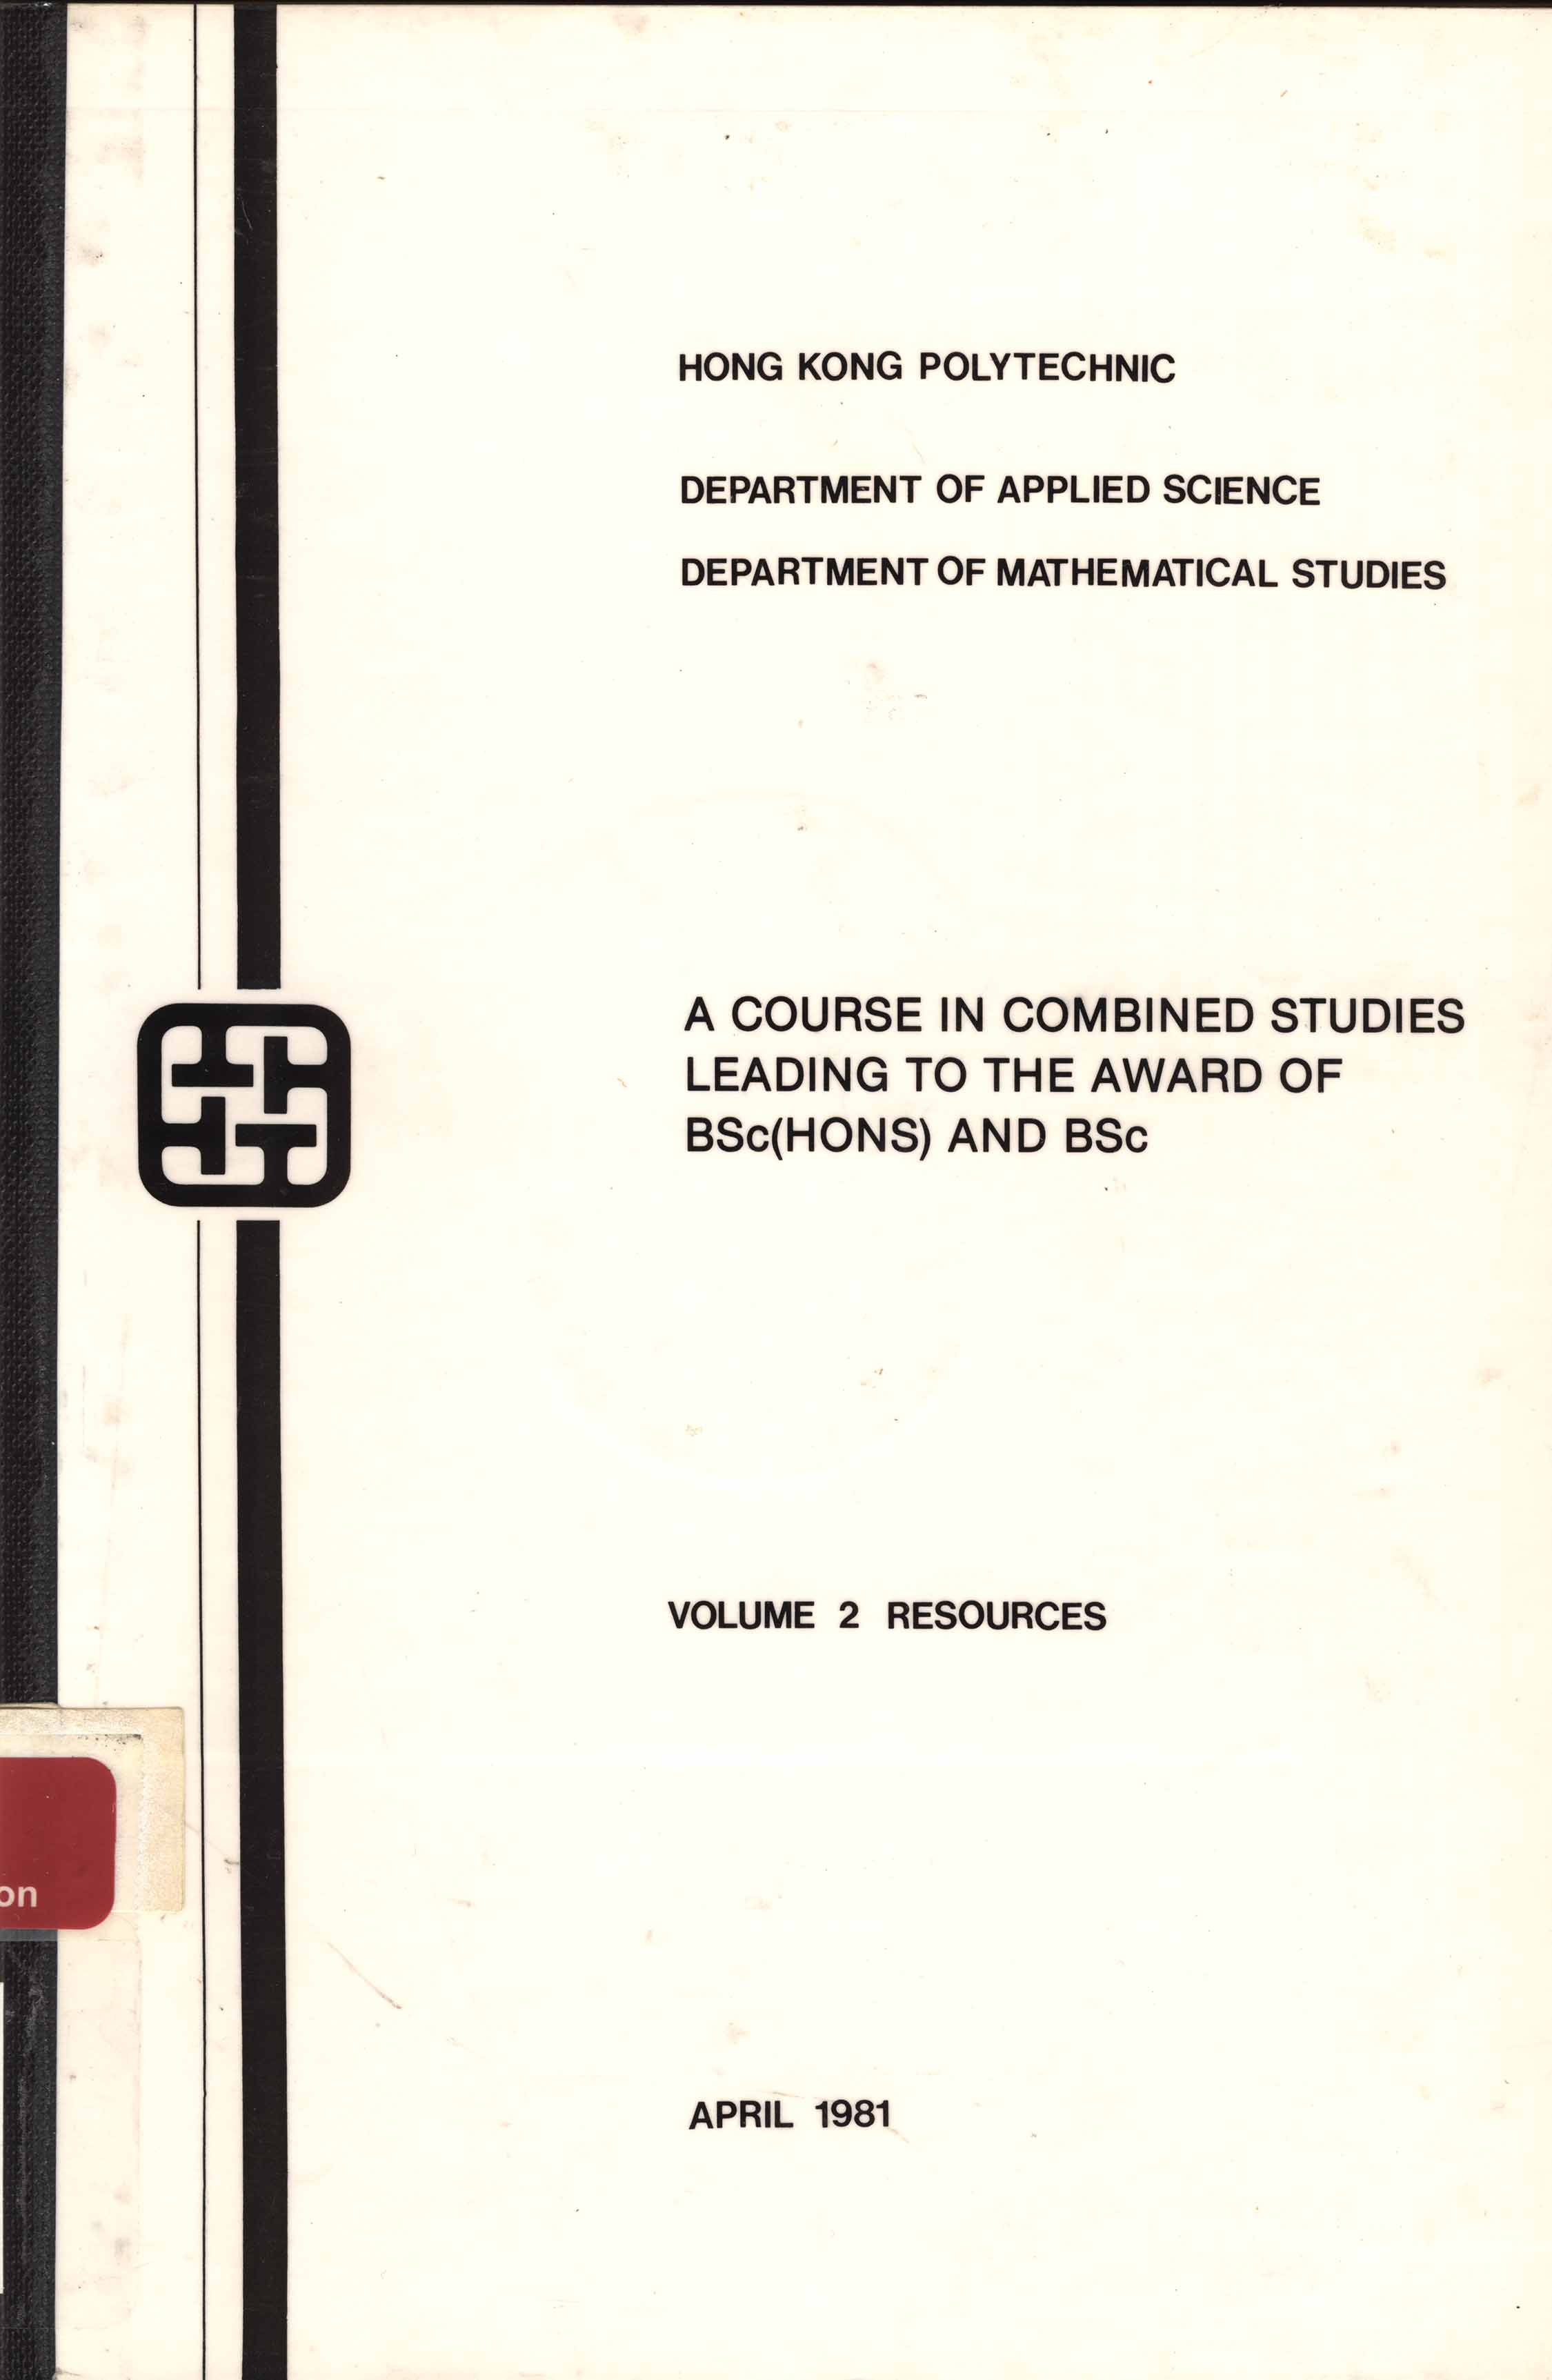 A course in combined studies leading to the award of BSc (Hons) and BSc. Volume 2: Resources